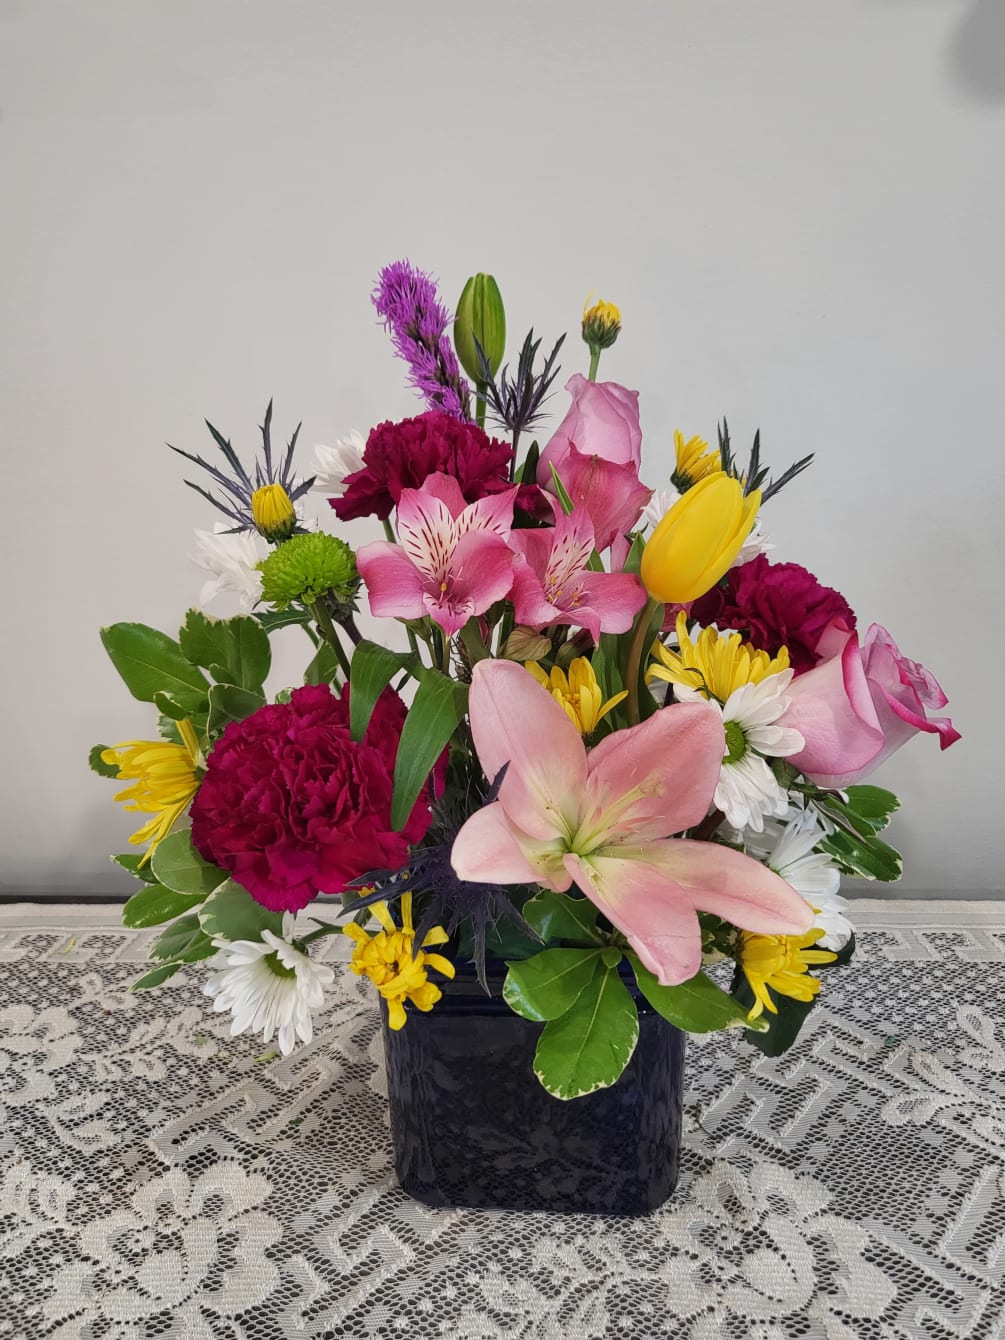 Iris,lilies,carnations,tulip and poms designed in a beautiful blue glass container with greens